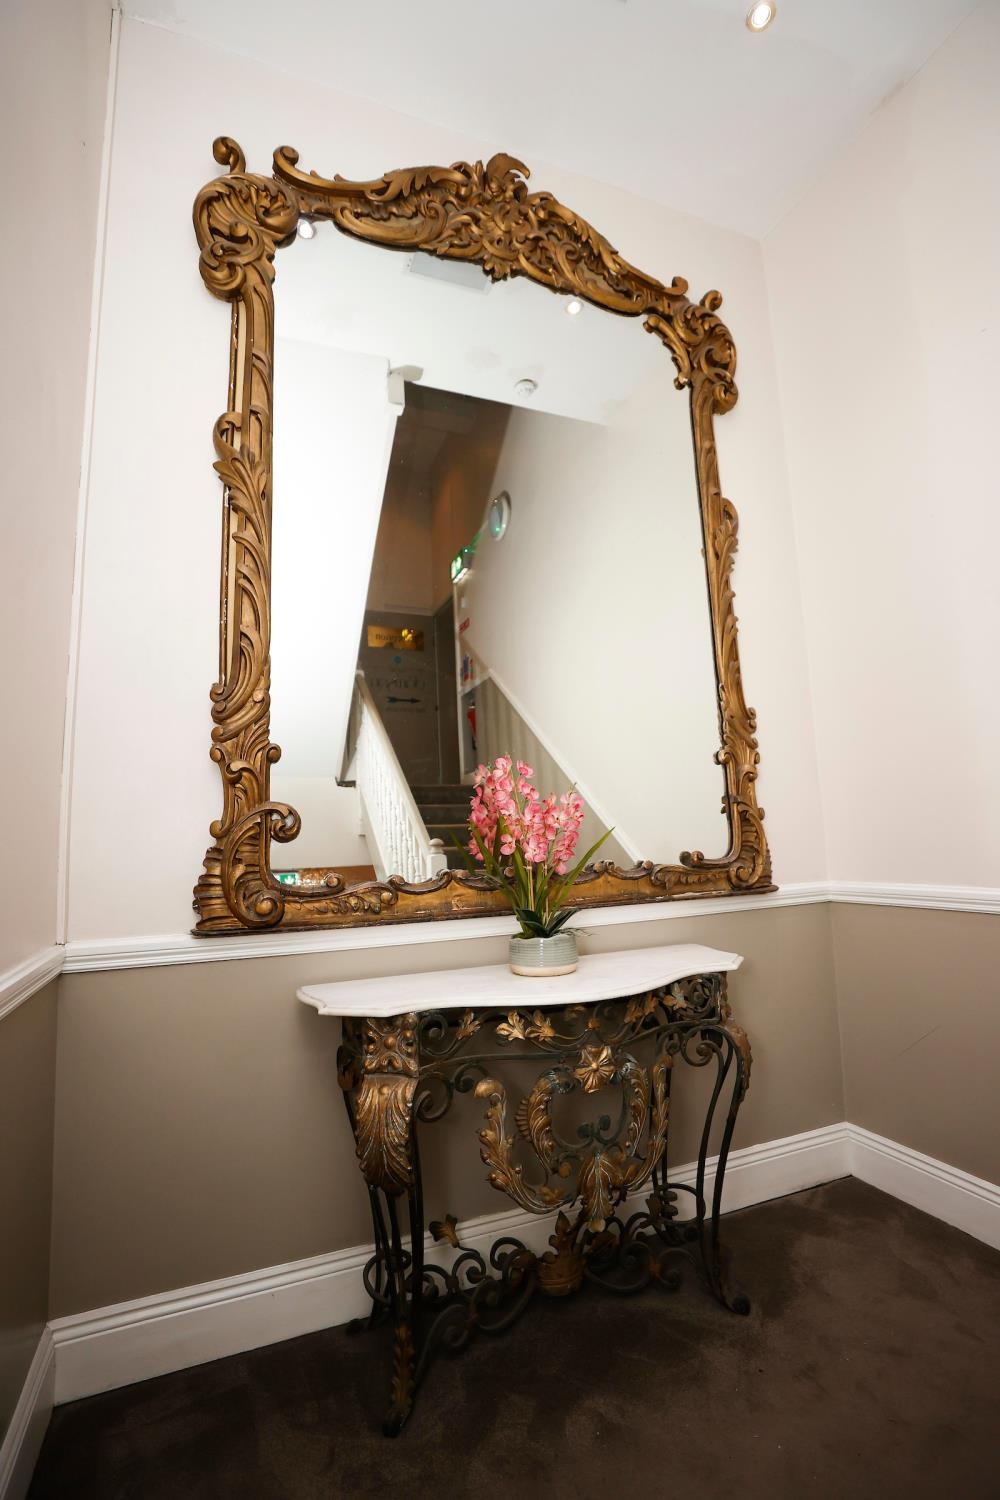 Spectacular Original early 19th century carved wood and gilt overmantle mirror W 180cm H 250cm